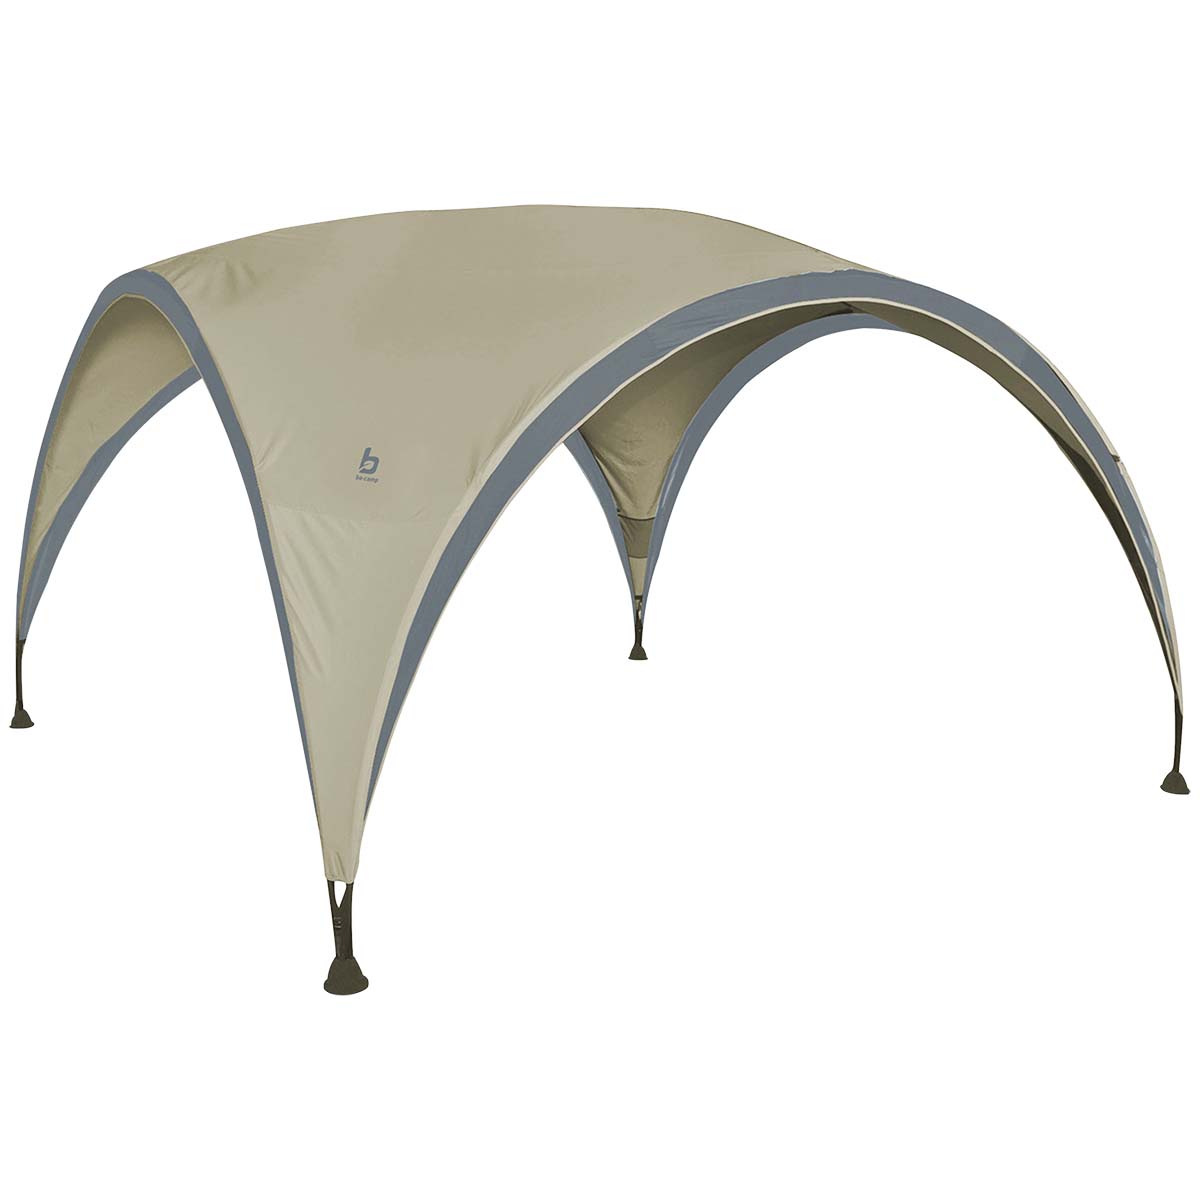 4472200 An extra large party shelter. Ideal for outdoor activities and events. This party shelter has an extremely sold tent canvas of 160 gr/m² polyester. This canvas is water proof (water column 1500 mm), UV resistant, flame retardant and has ventilation at the top. The strong steel bow poles and the stable feet ensure that this shelter is extra sturdy and stable, even on swampy surfaces. The shelter is easy to set-up and to extend with various side walls that are fixed by means of velcro. Supplied complete with guy ropes, pegs and a transport bag.